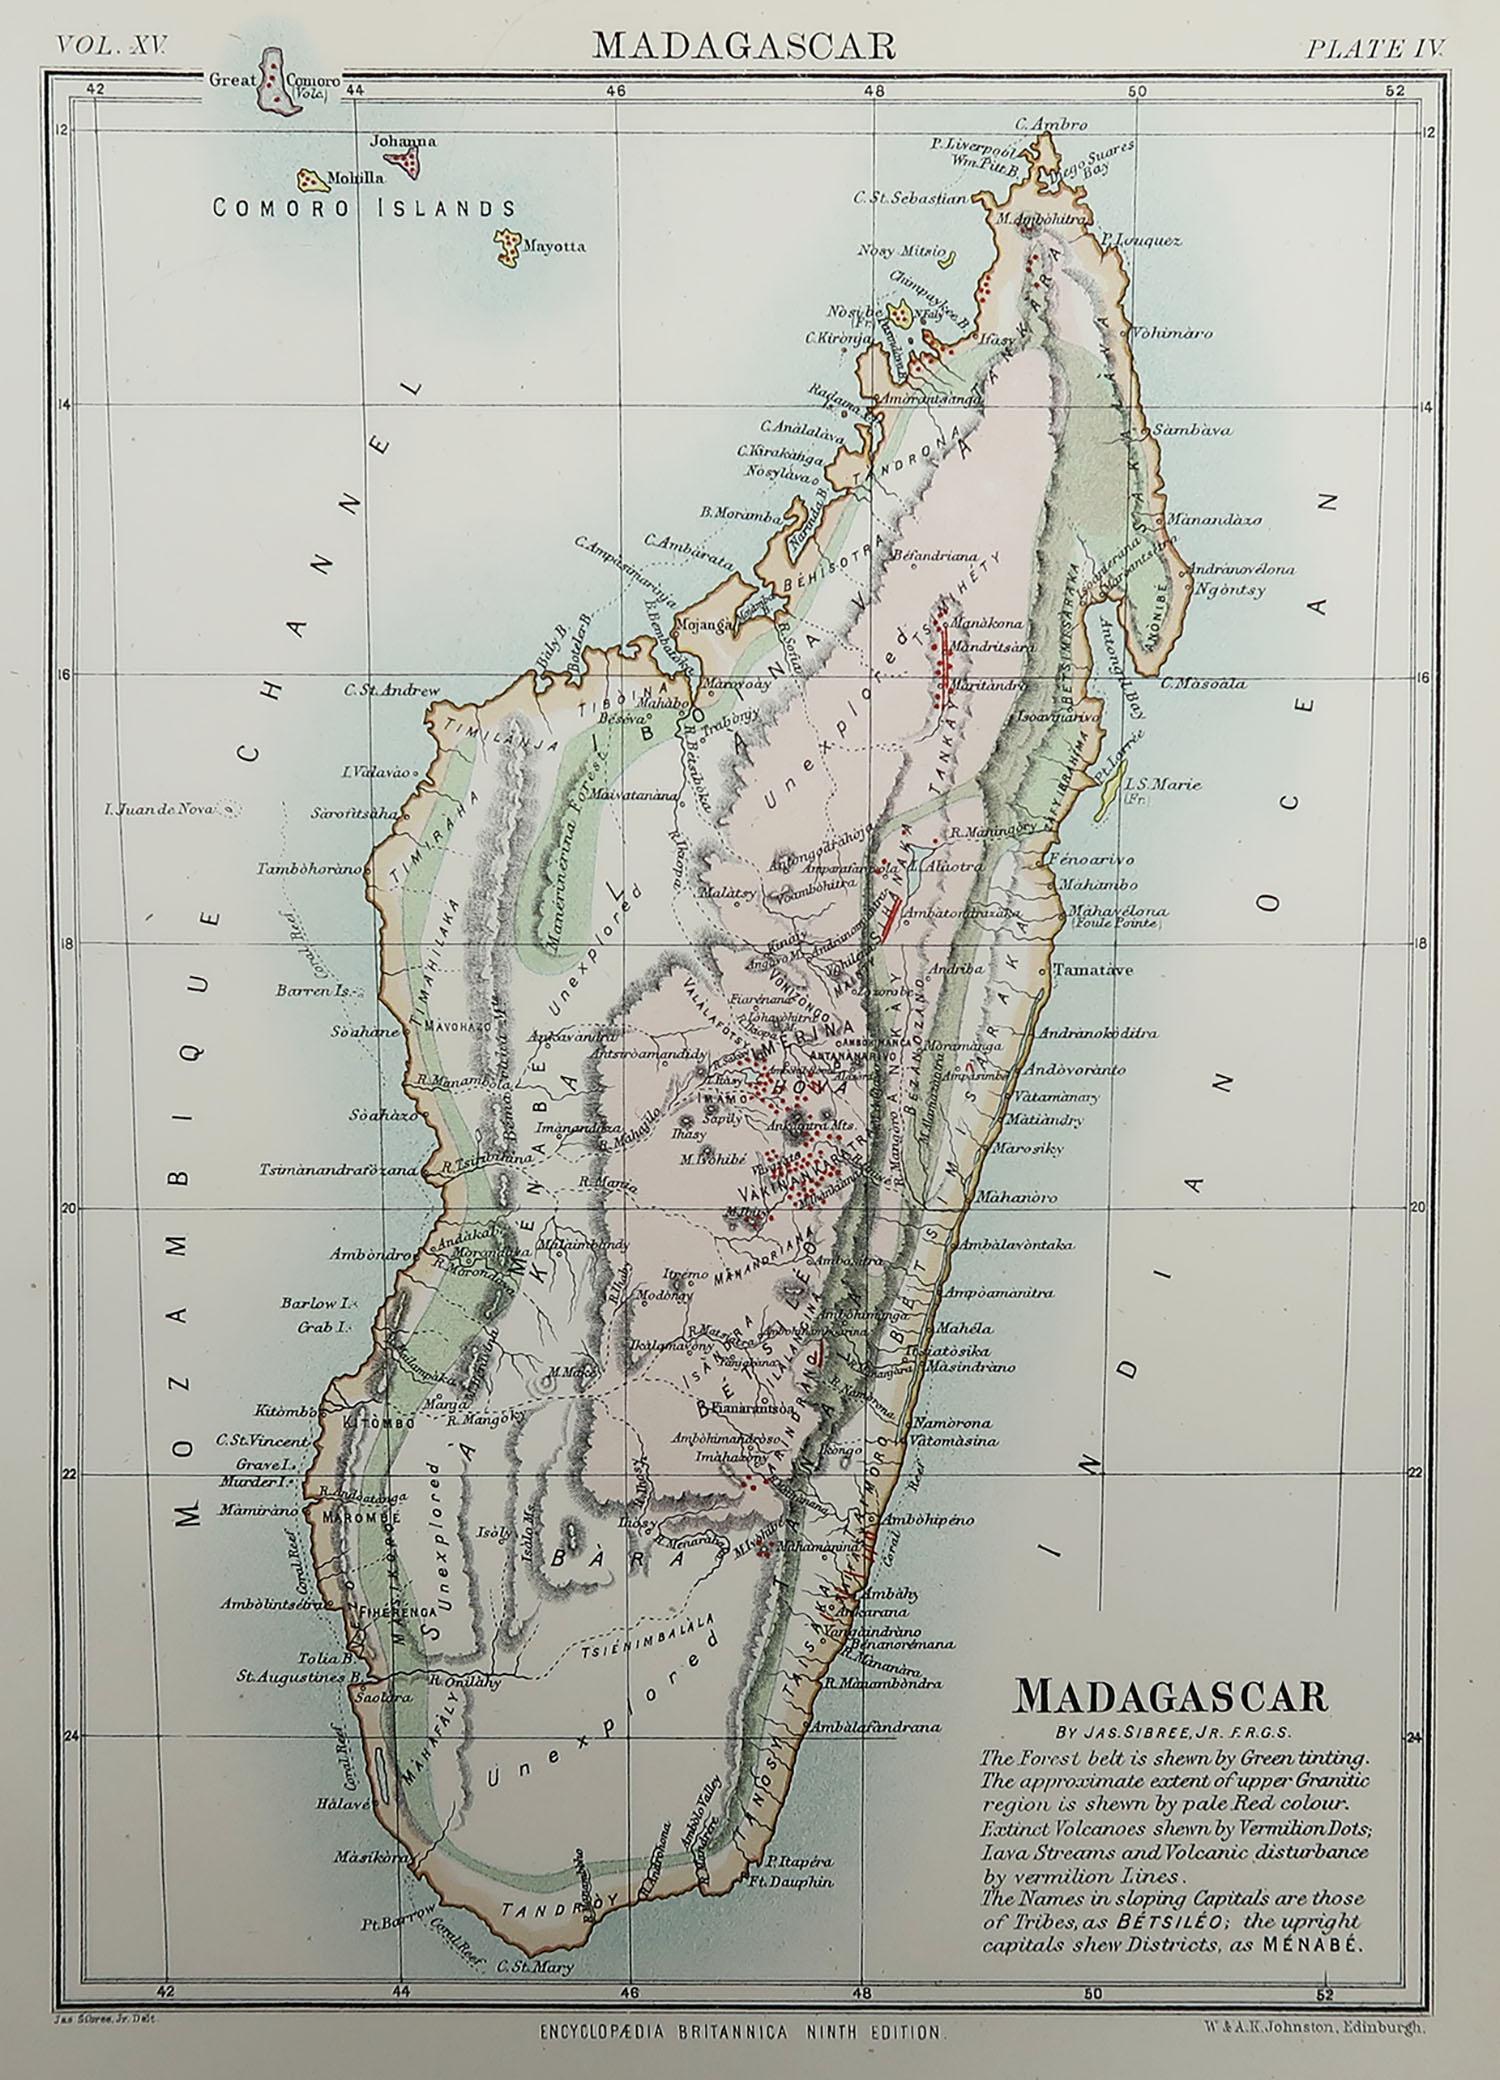 Great map of Madagascar

Drawn and Engraved by W. & A.K. Johnston

Published By A & C Black, Edinburgh.

Original colour

Unframed.








 